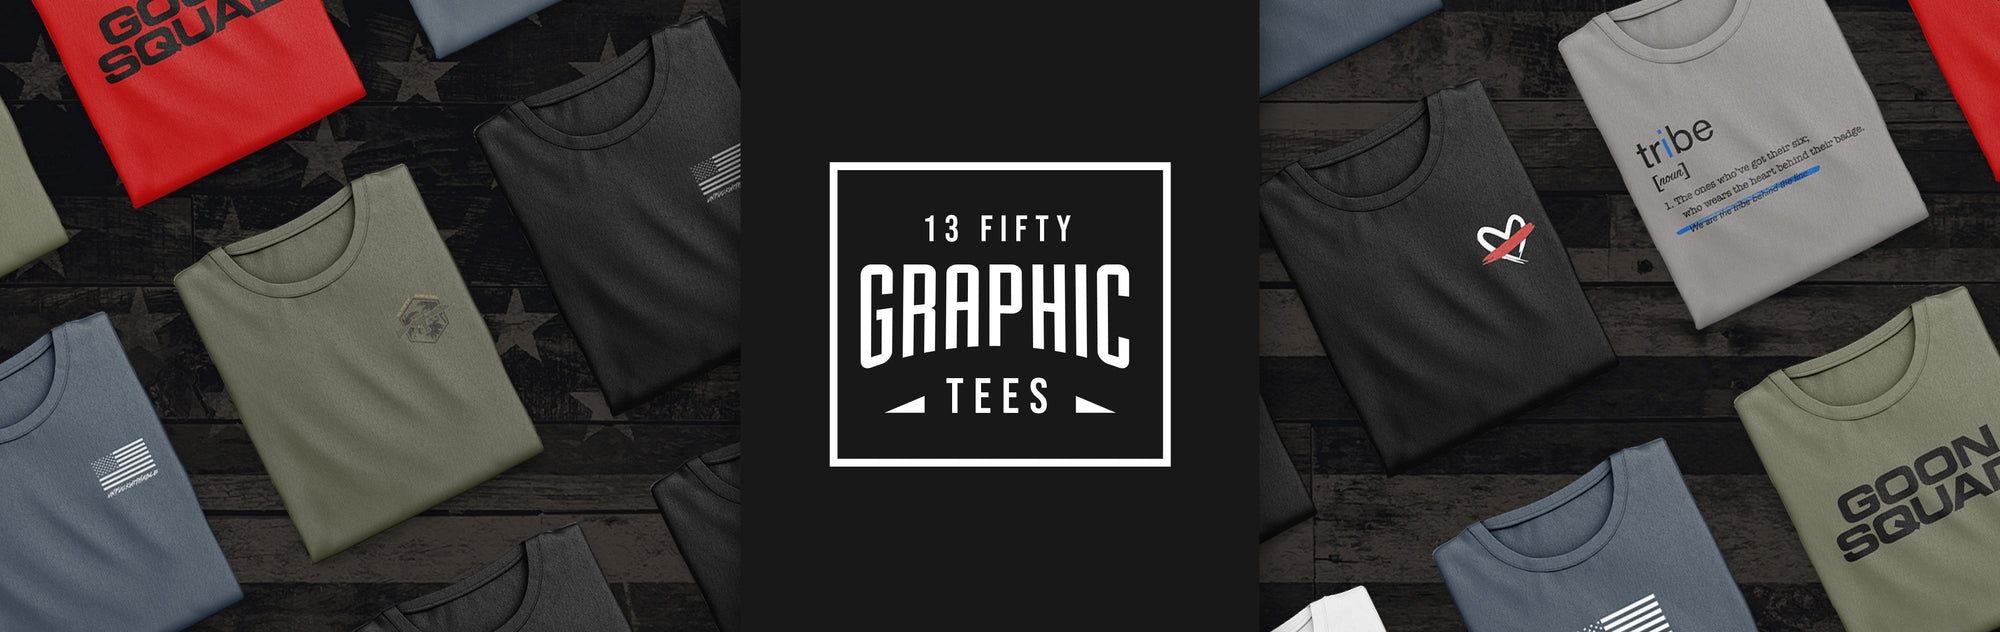 NEW GRAPHIC TEES-13 Fifty Apparel